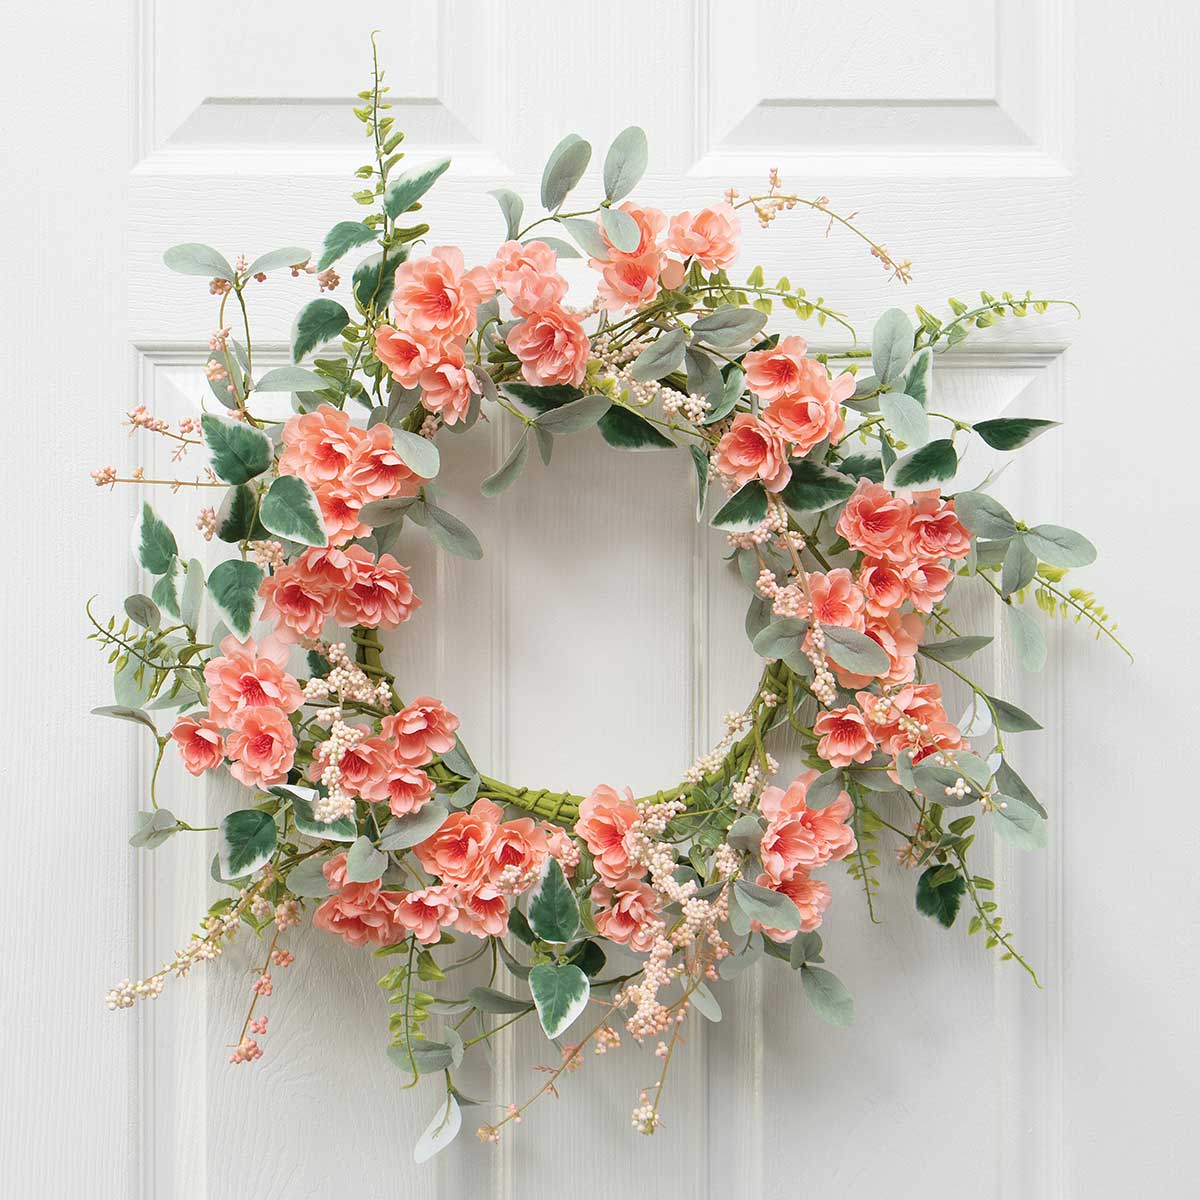 !Blossom Mixed Foliage Wreath with Berries Apricot